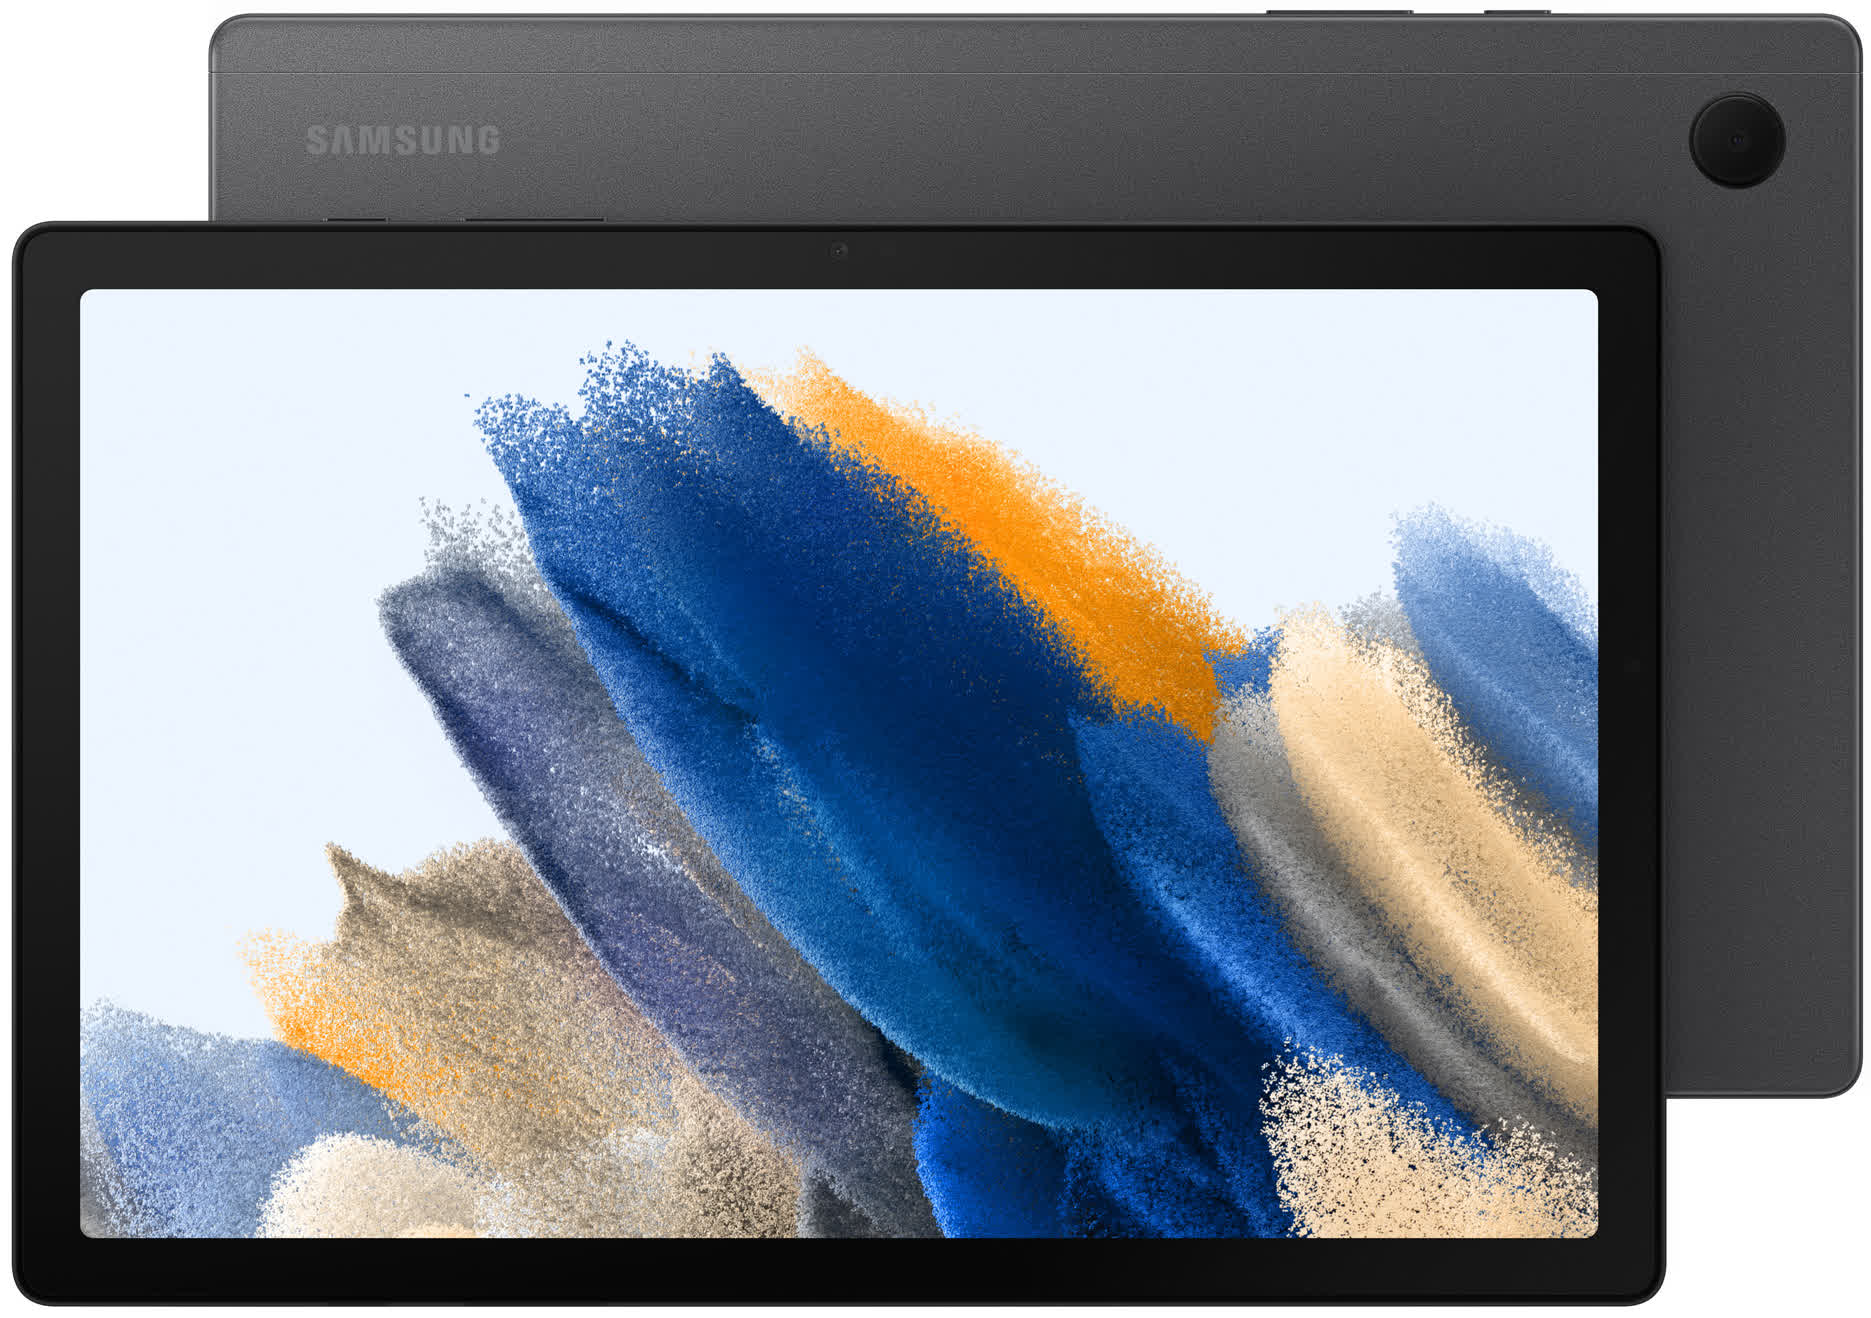 Samsung's new Galaxy Tab A8 packs a bigger screen and a faster CPU